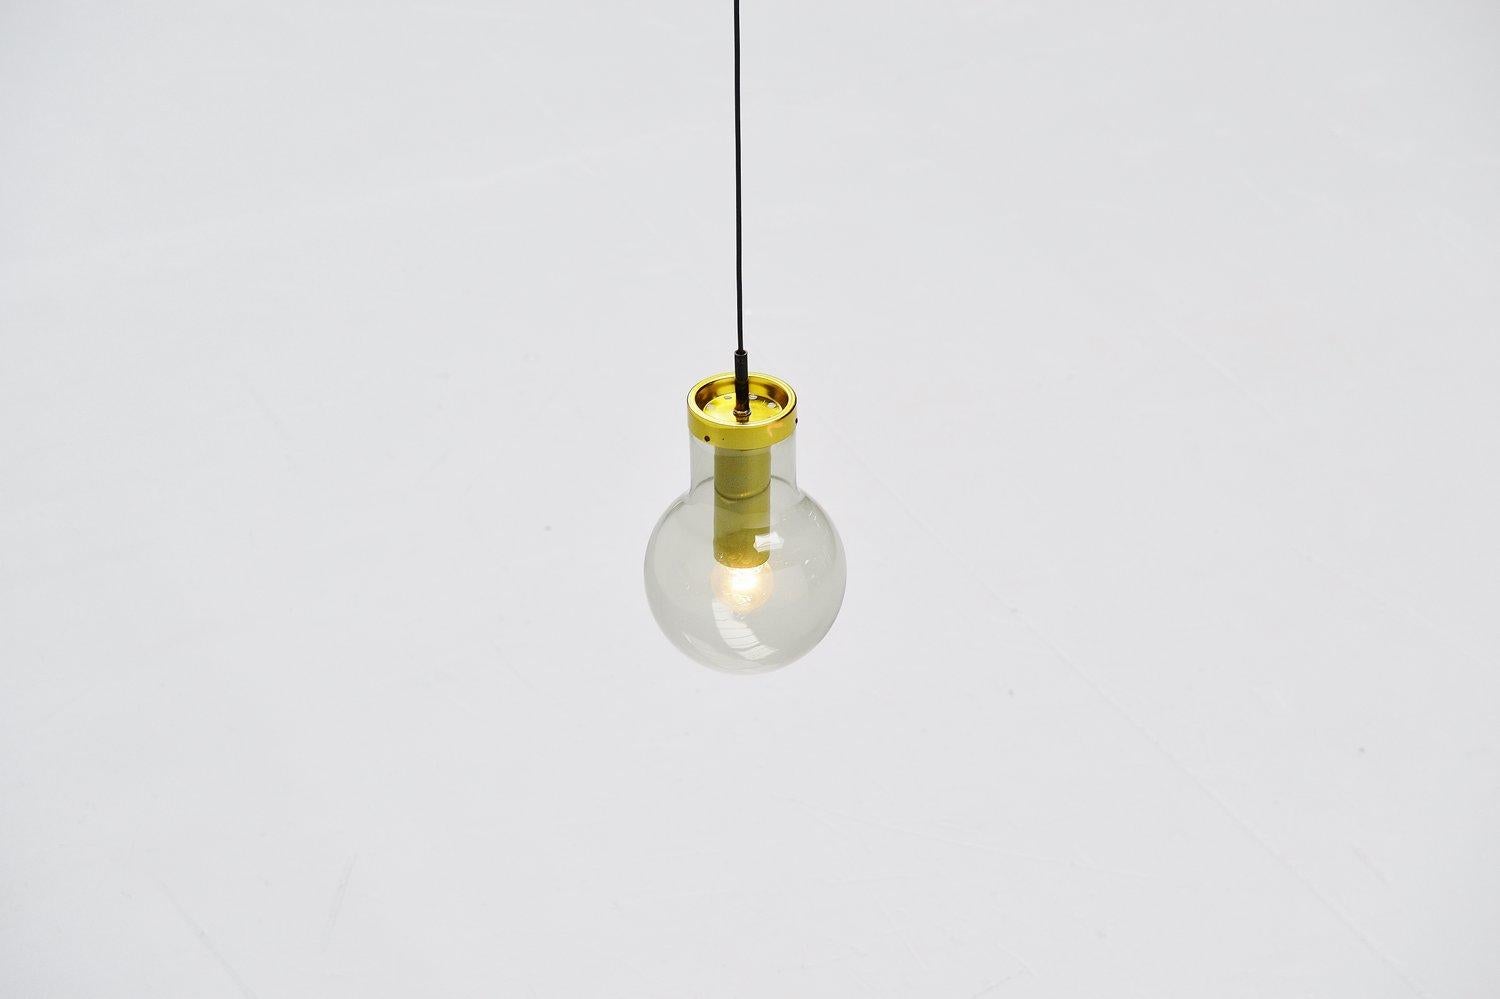 Glass RAAK Amsterdam Maxi Globe M Pendant Lamps, The Netherlands 1965 For Sale